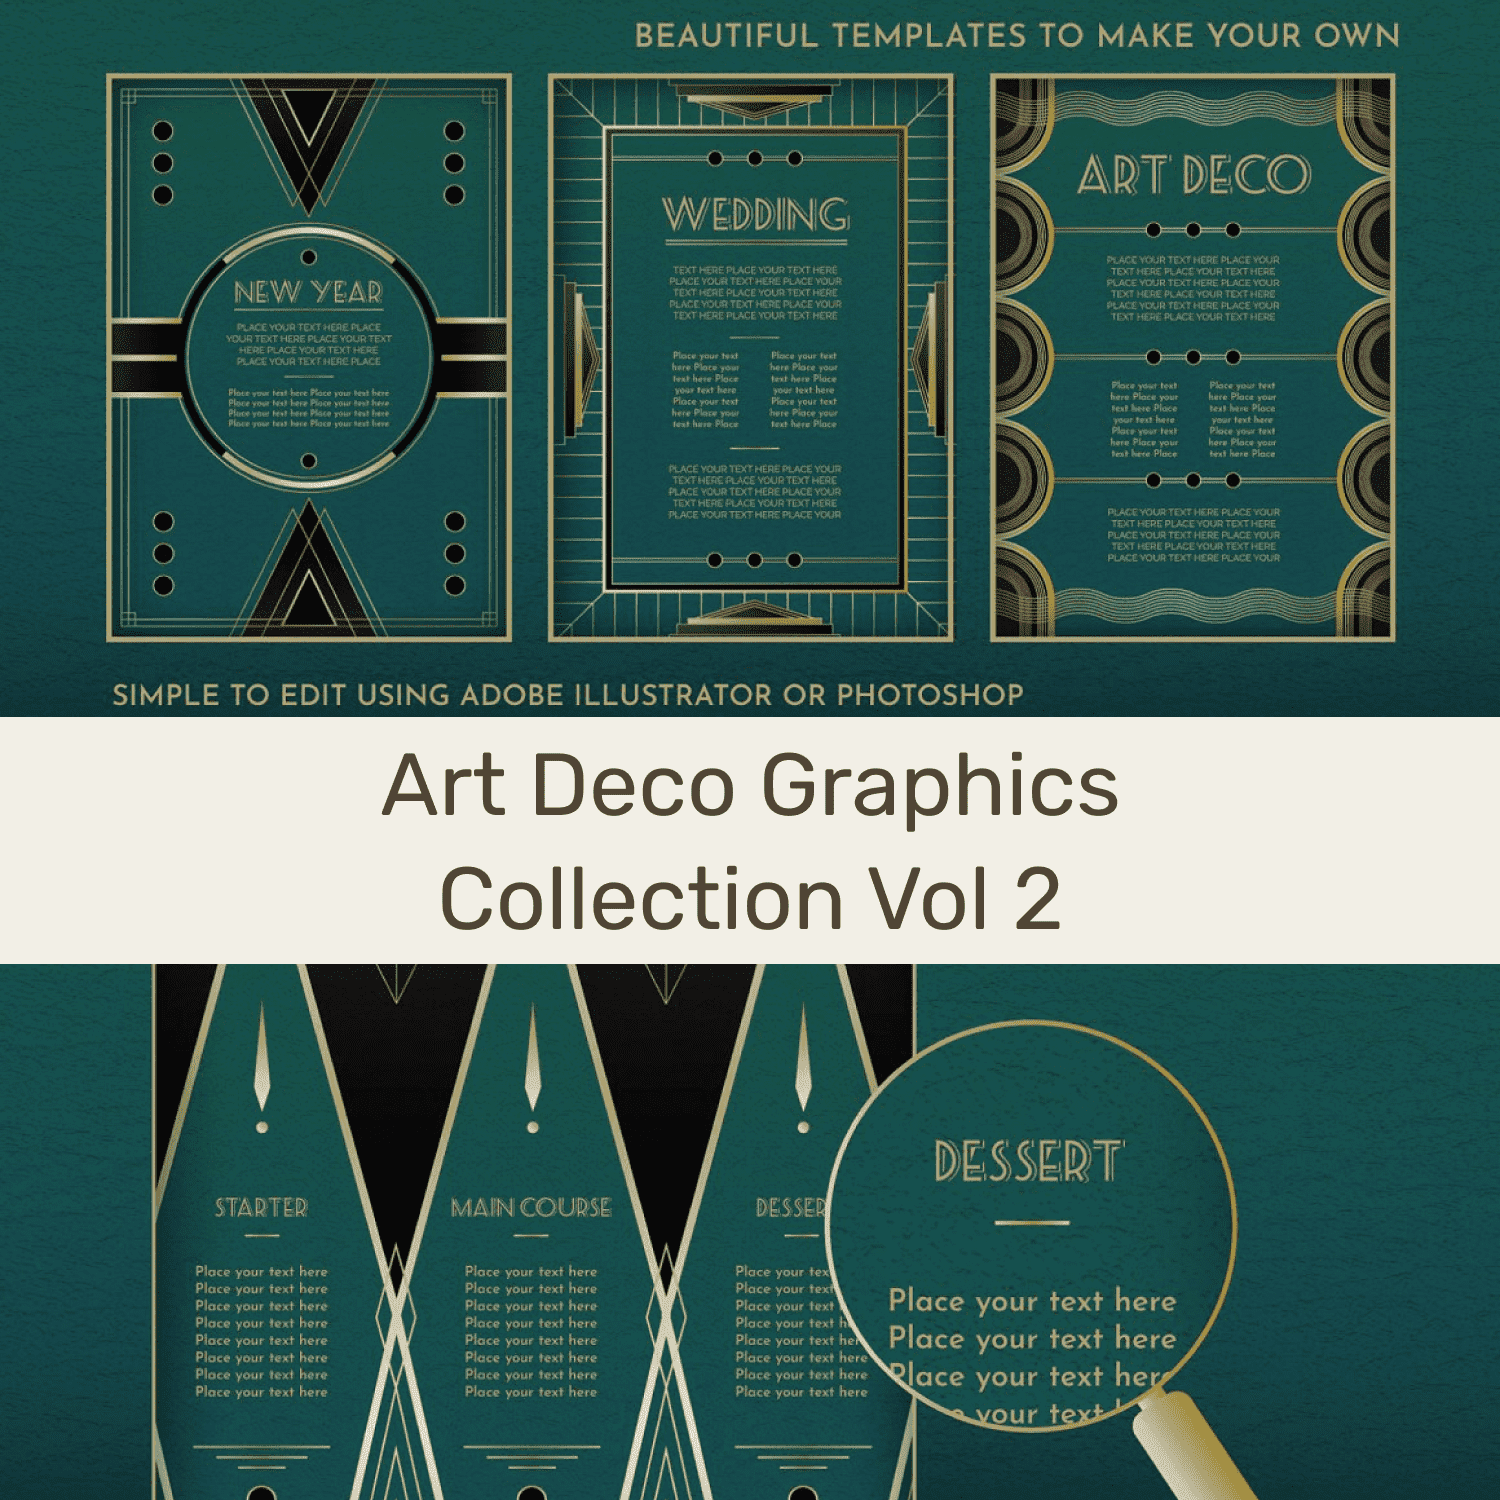 art deco graphics collection vol 2 preview image.